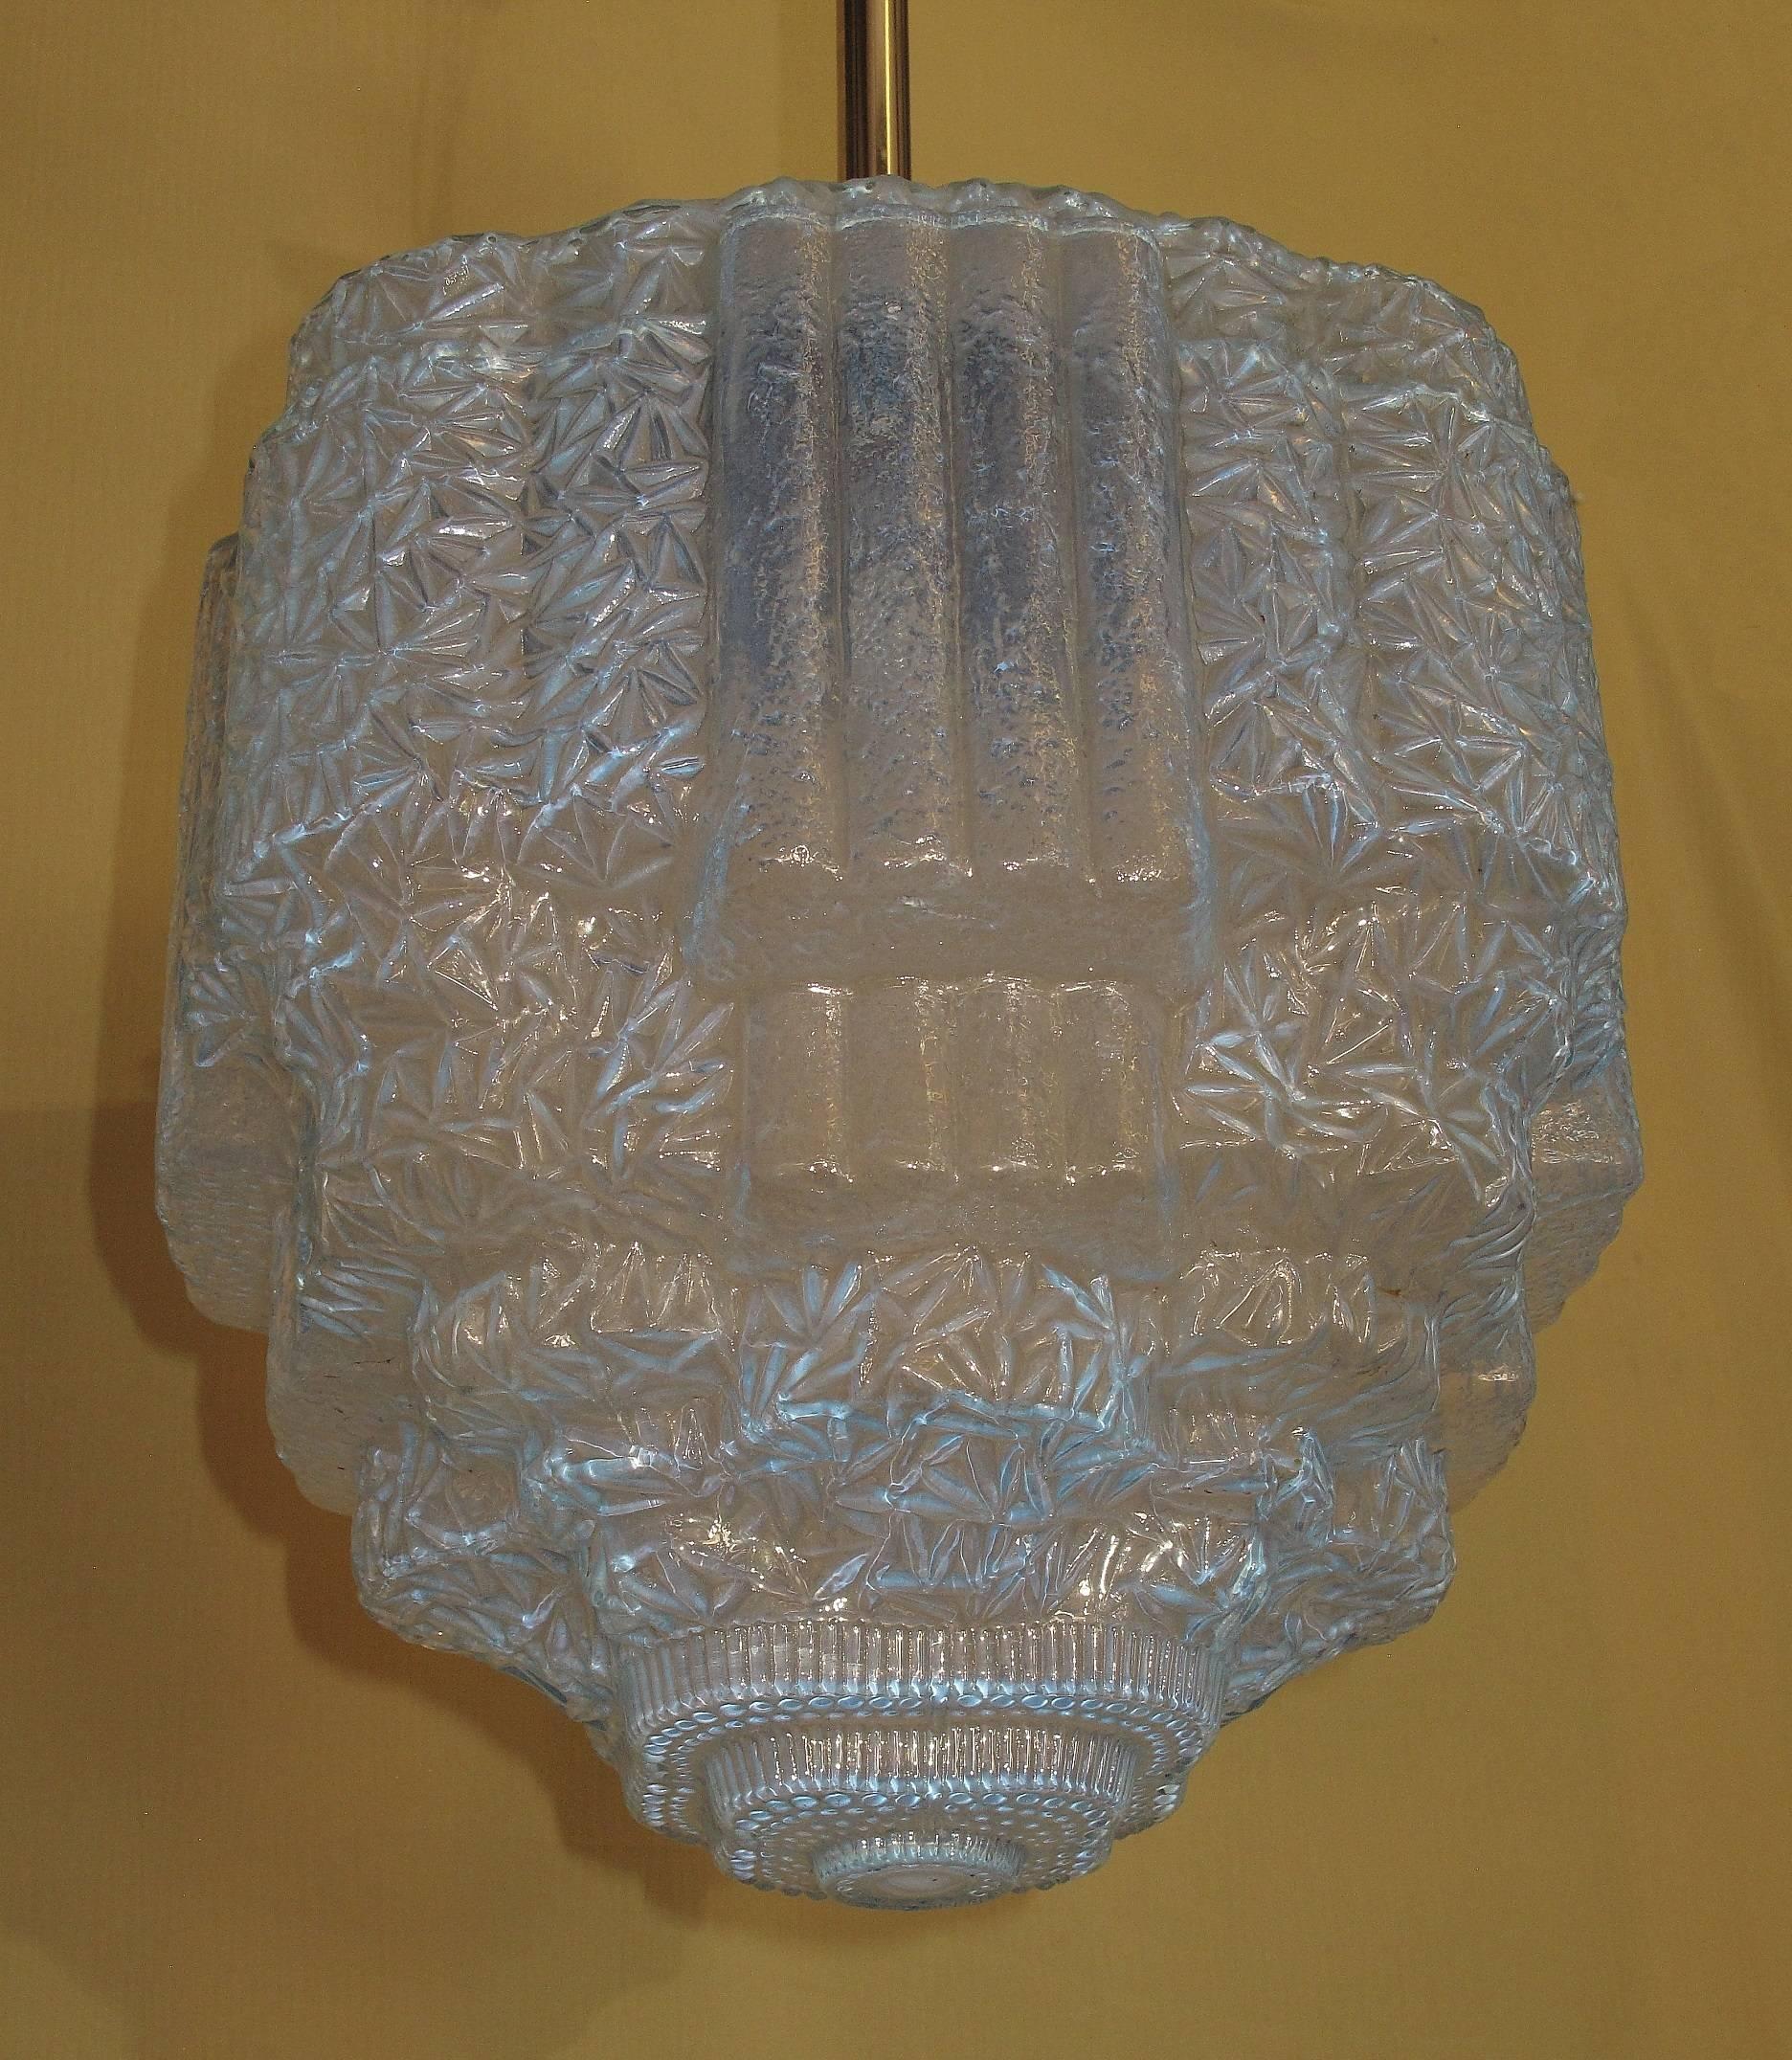 Plated Blue Ice Deco Ceiling Fixture, circa 1930